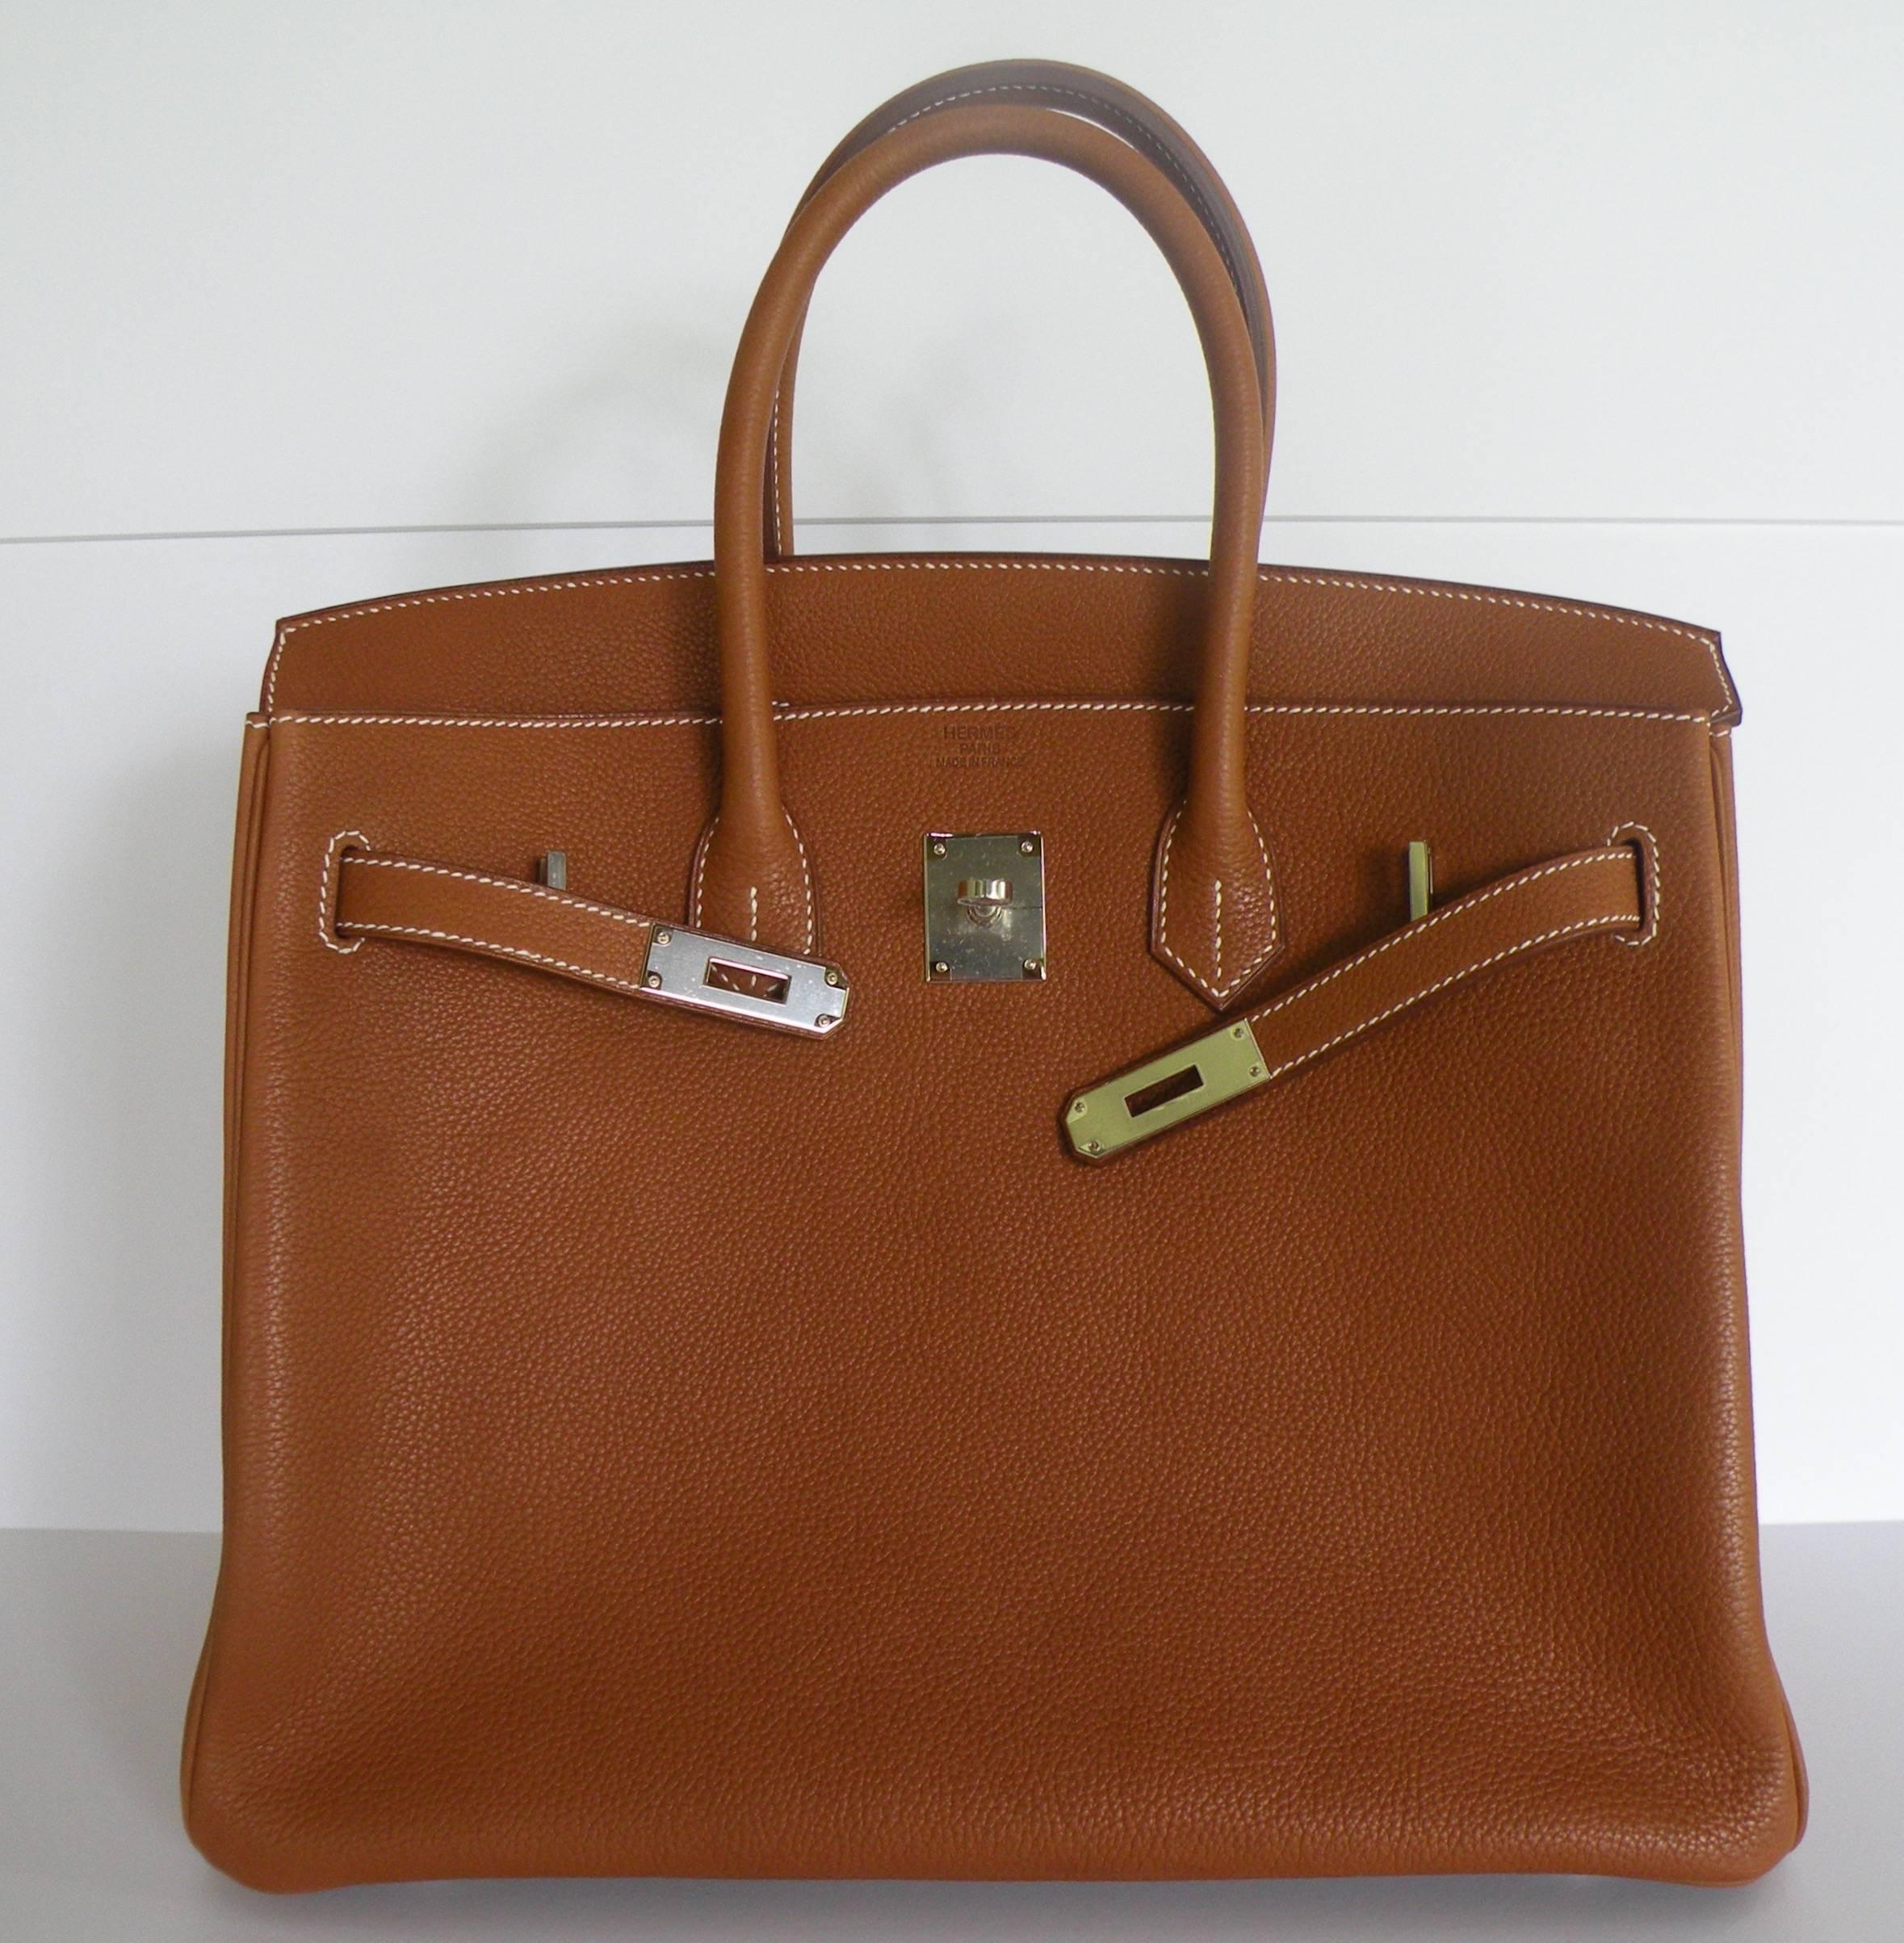 HERMES BIRKIN 35 Bag Barenia Faubourg Palladium Hardware RARE In New Condition For Sale In West Chester, PA